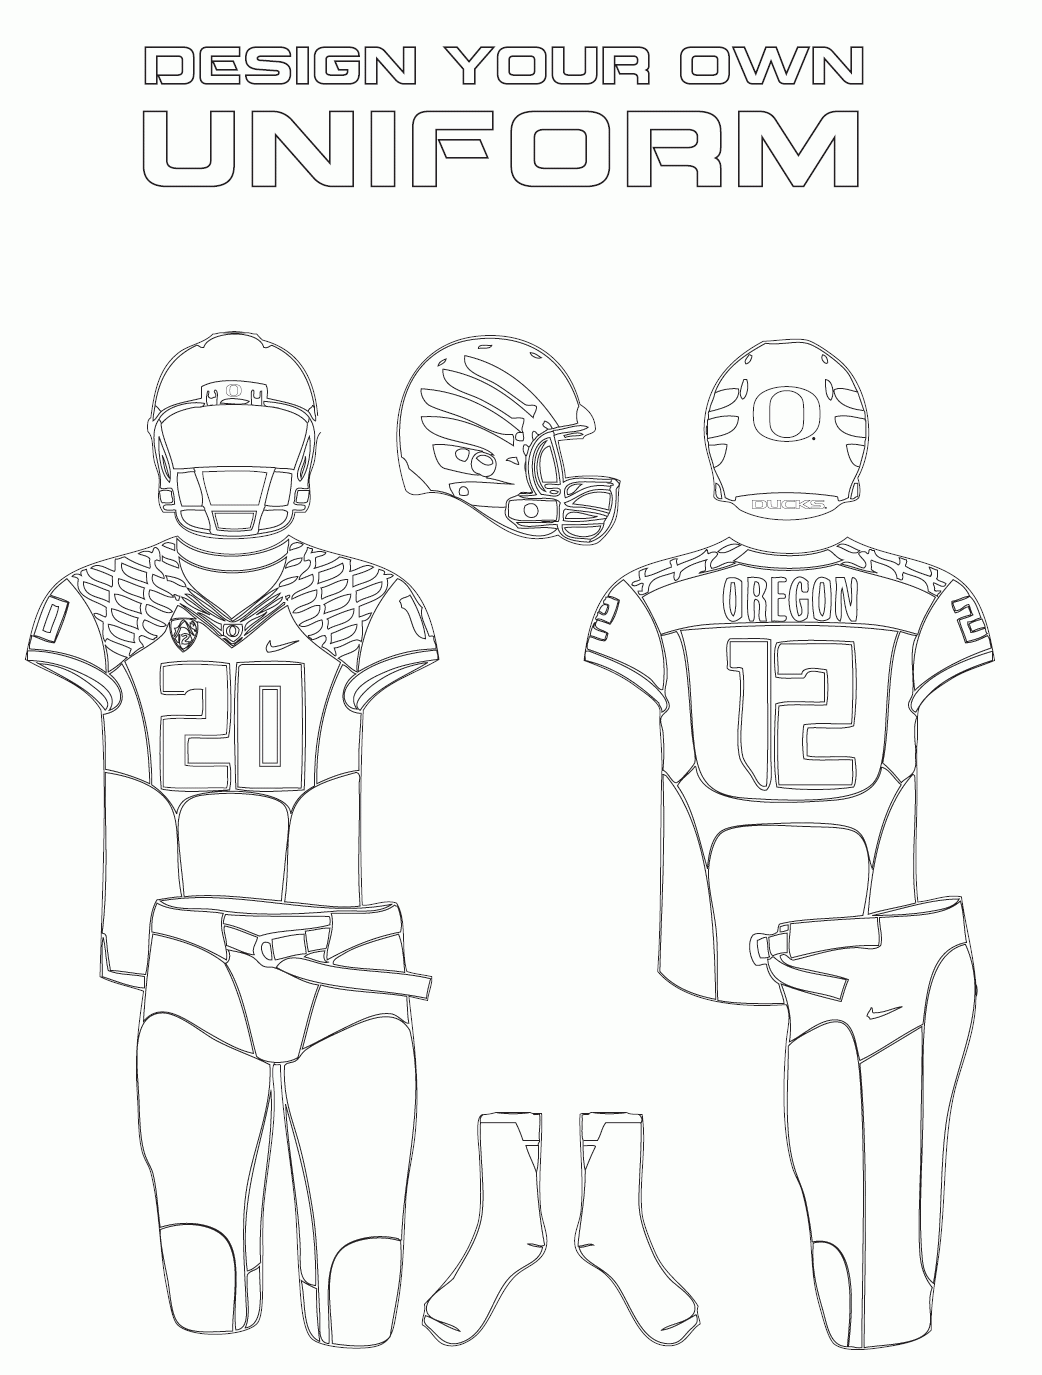 Oregon ducks football coloring pages